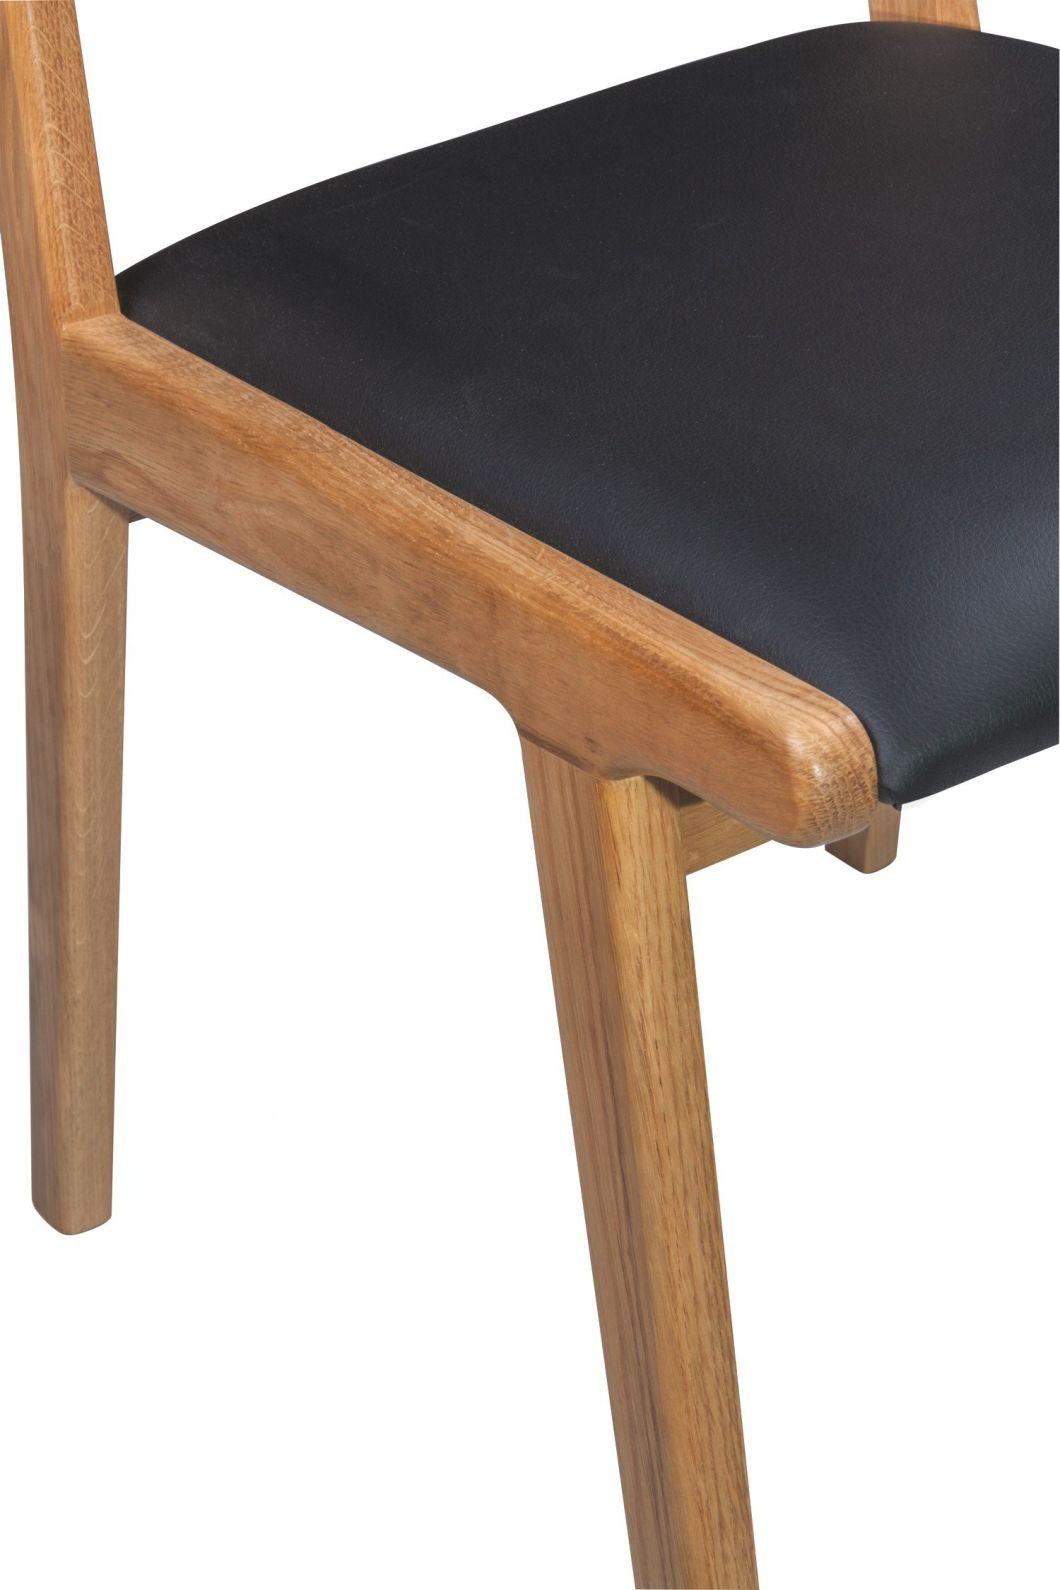 Solid Wood High Density Fabric Upholstery Modern Home Restaurant Dining Chair Restaurant